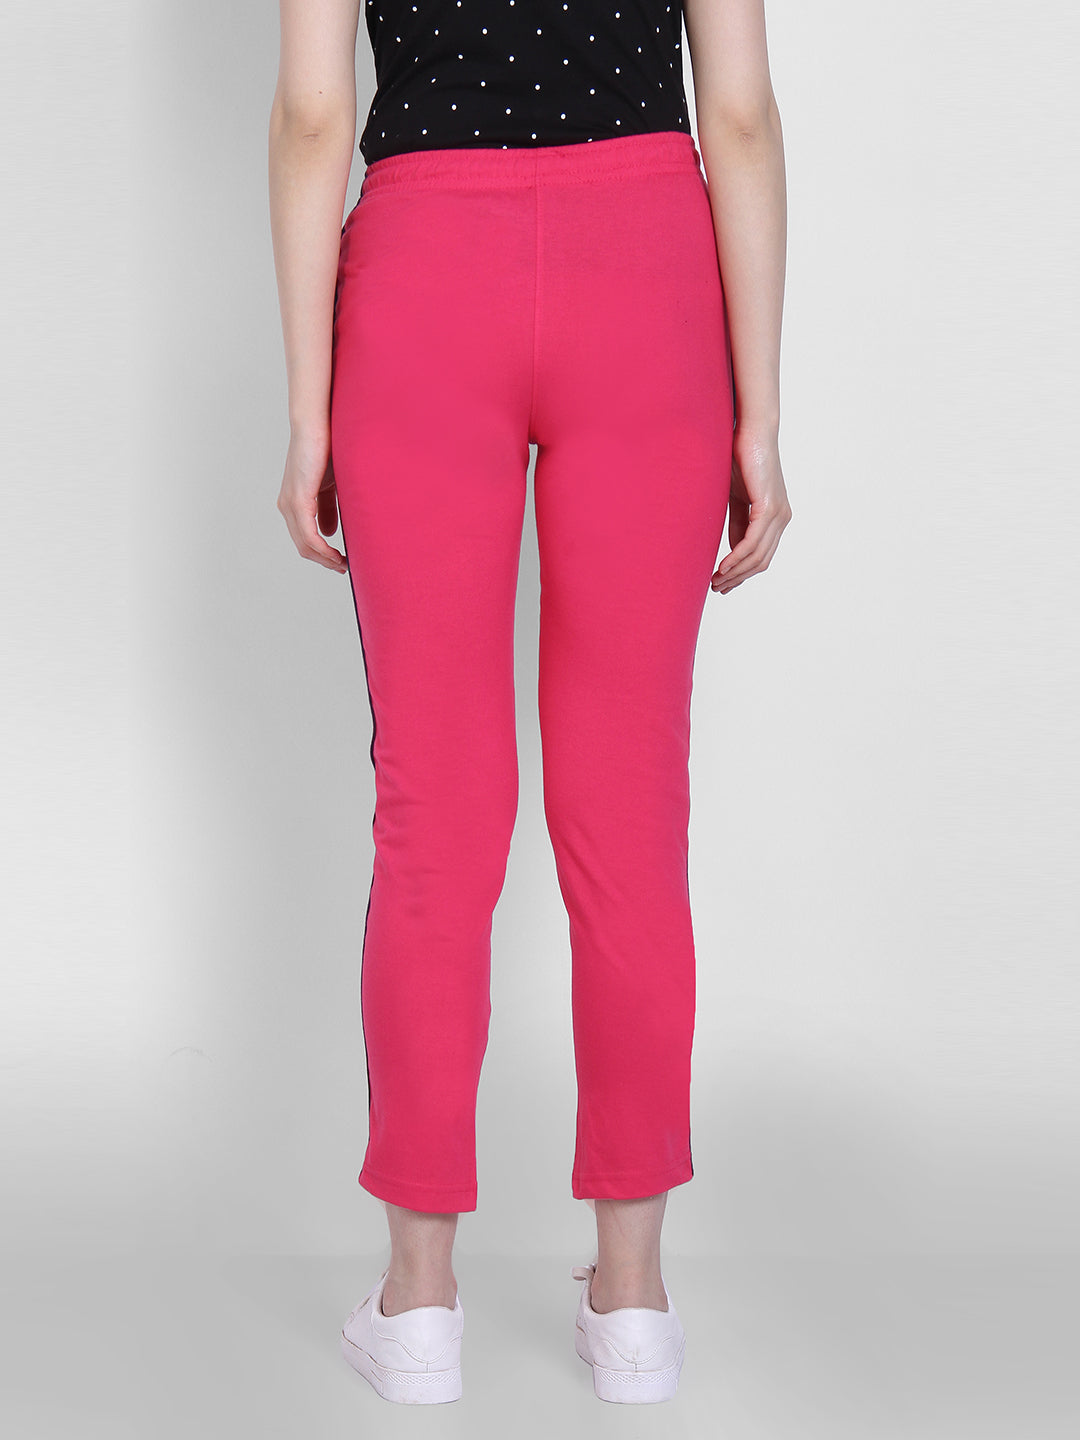 Hot Pink Flare Pants with Hot Pink Pants Outfits (3 ideas & outfits) |  Lookastic